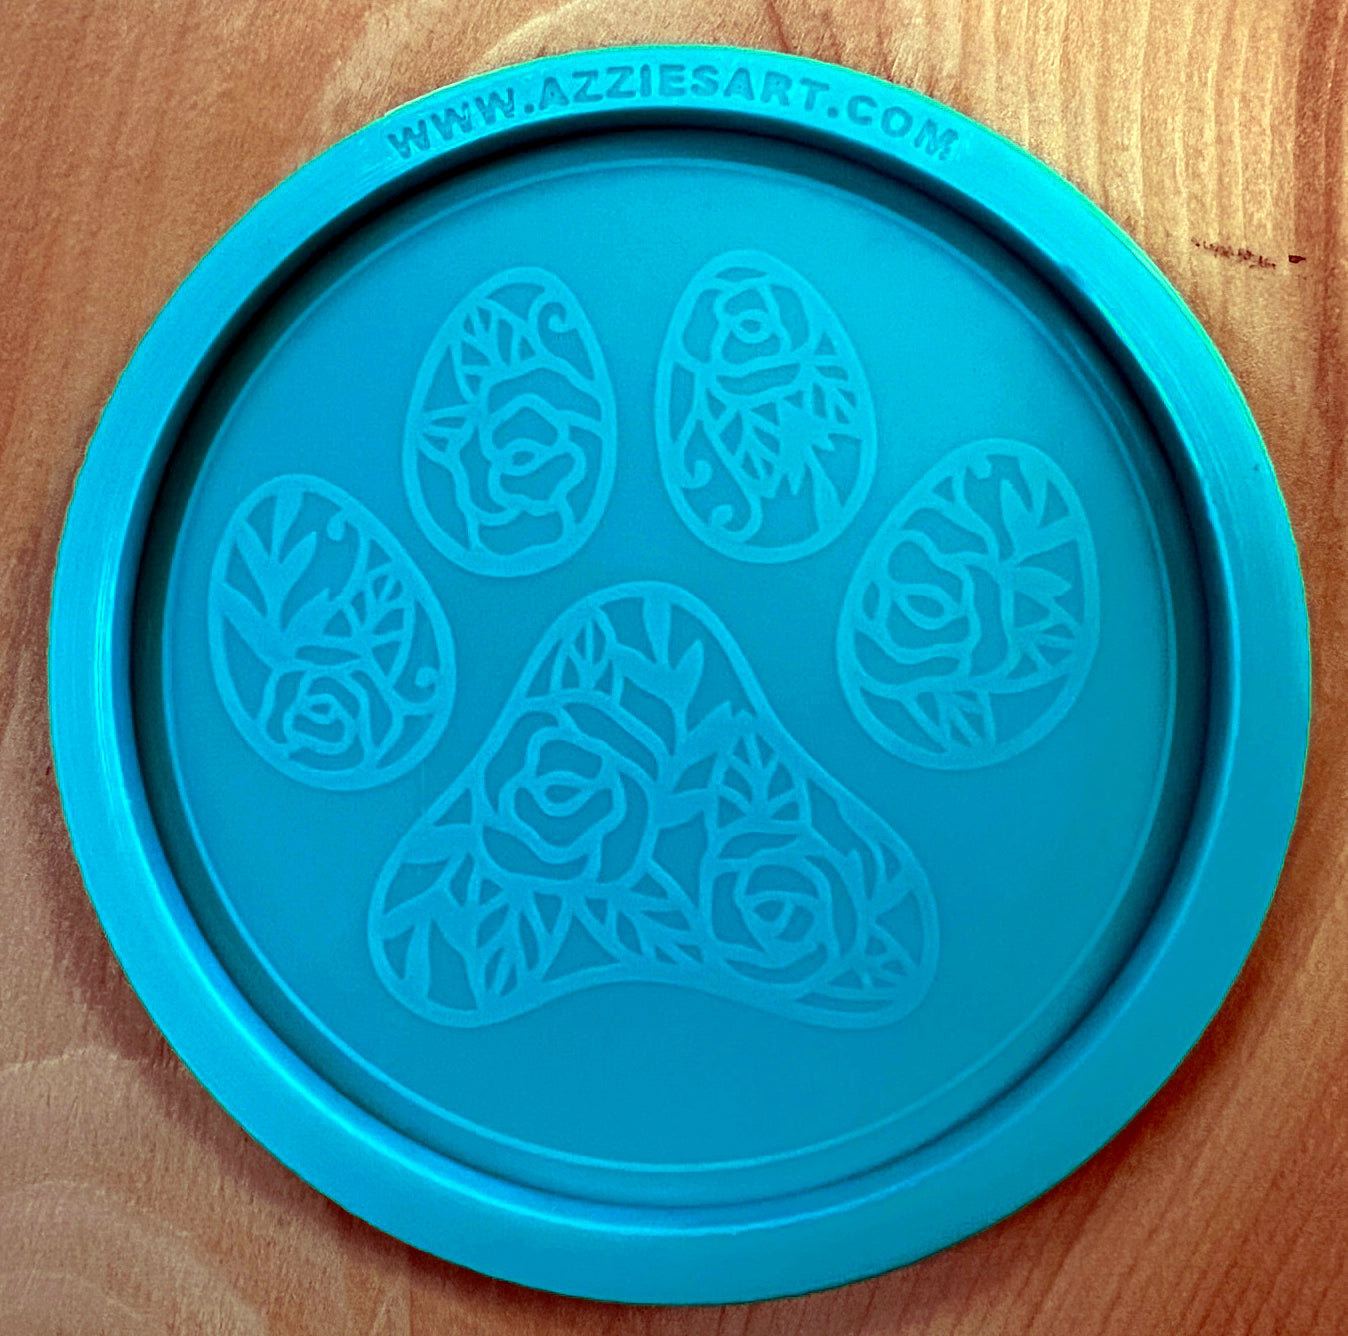 Discontinued - LG Roses Paw Print Coaster Silicone Mold